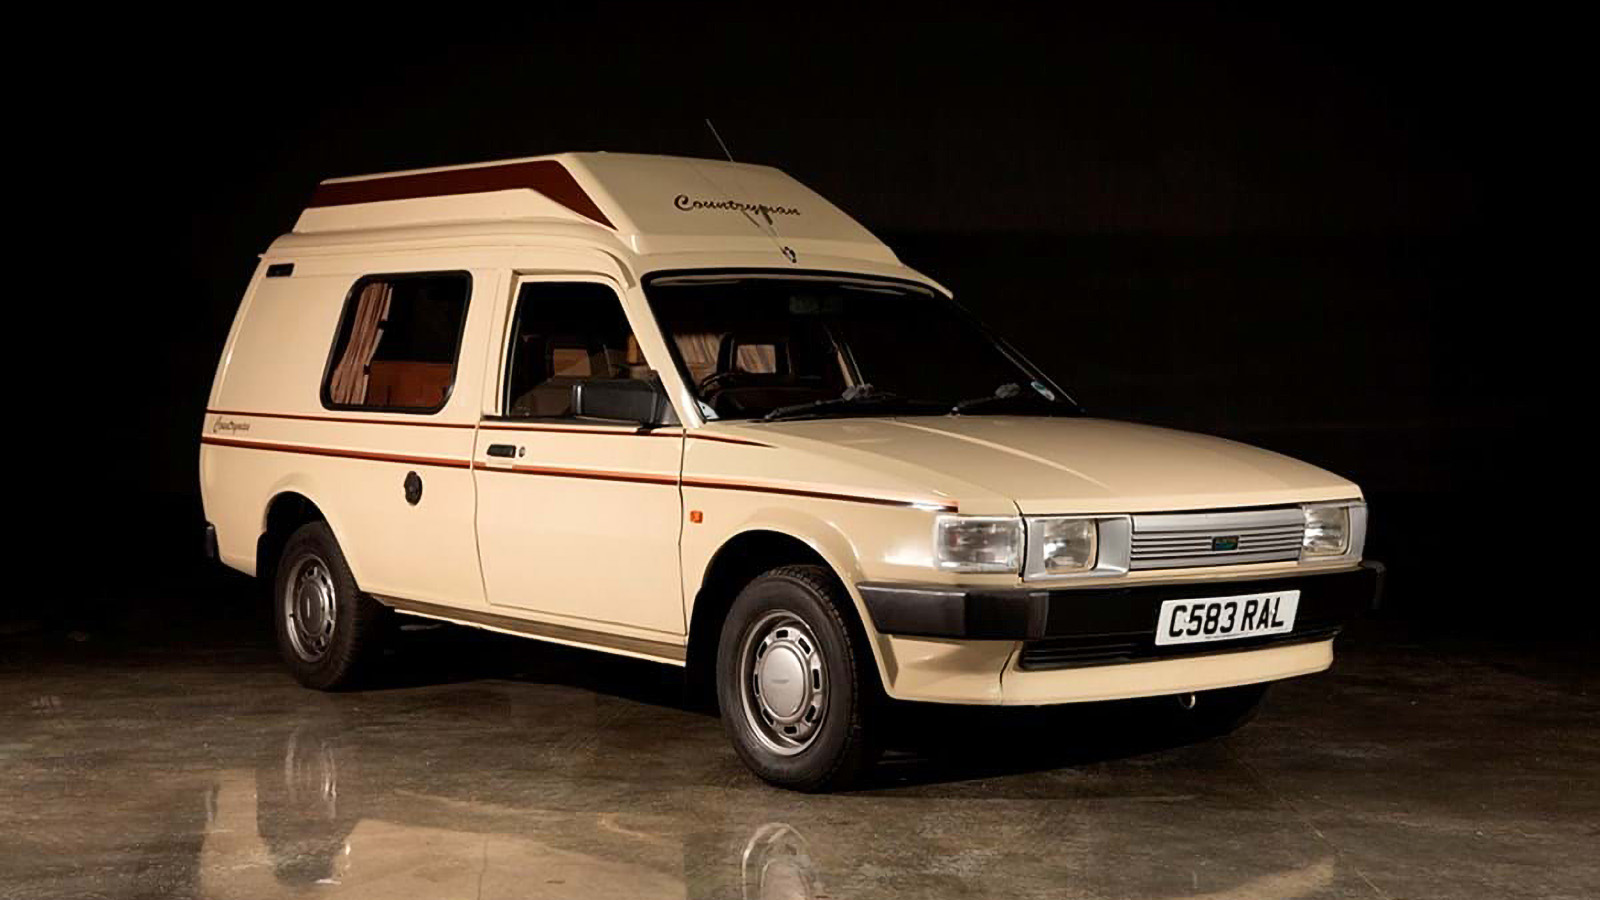 This Austin Maestro Countryman Is a Tiny Camper for a Tiny Price